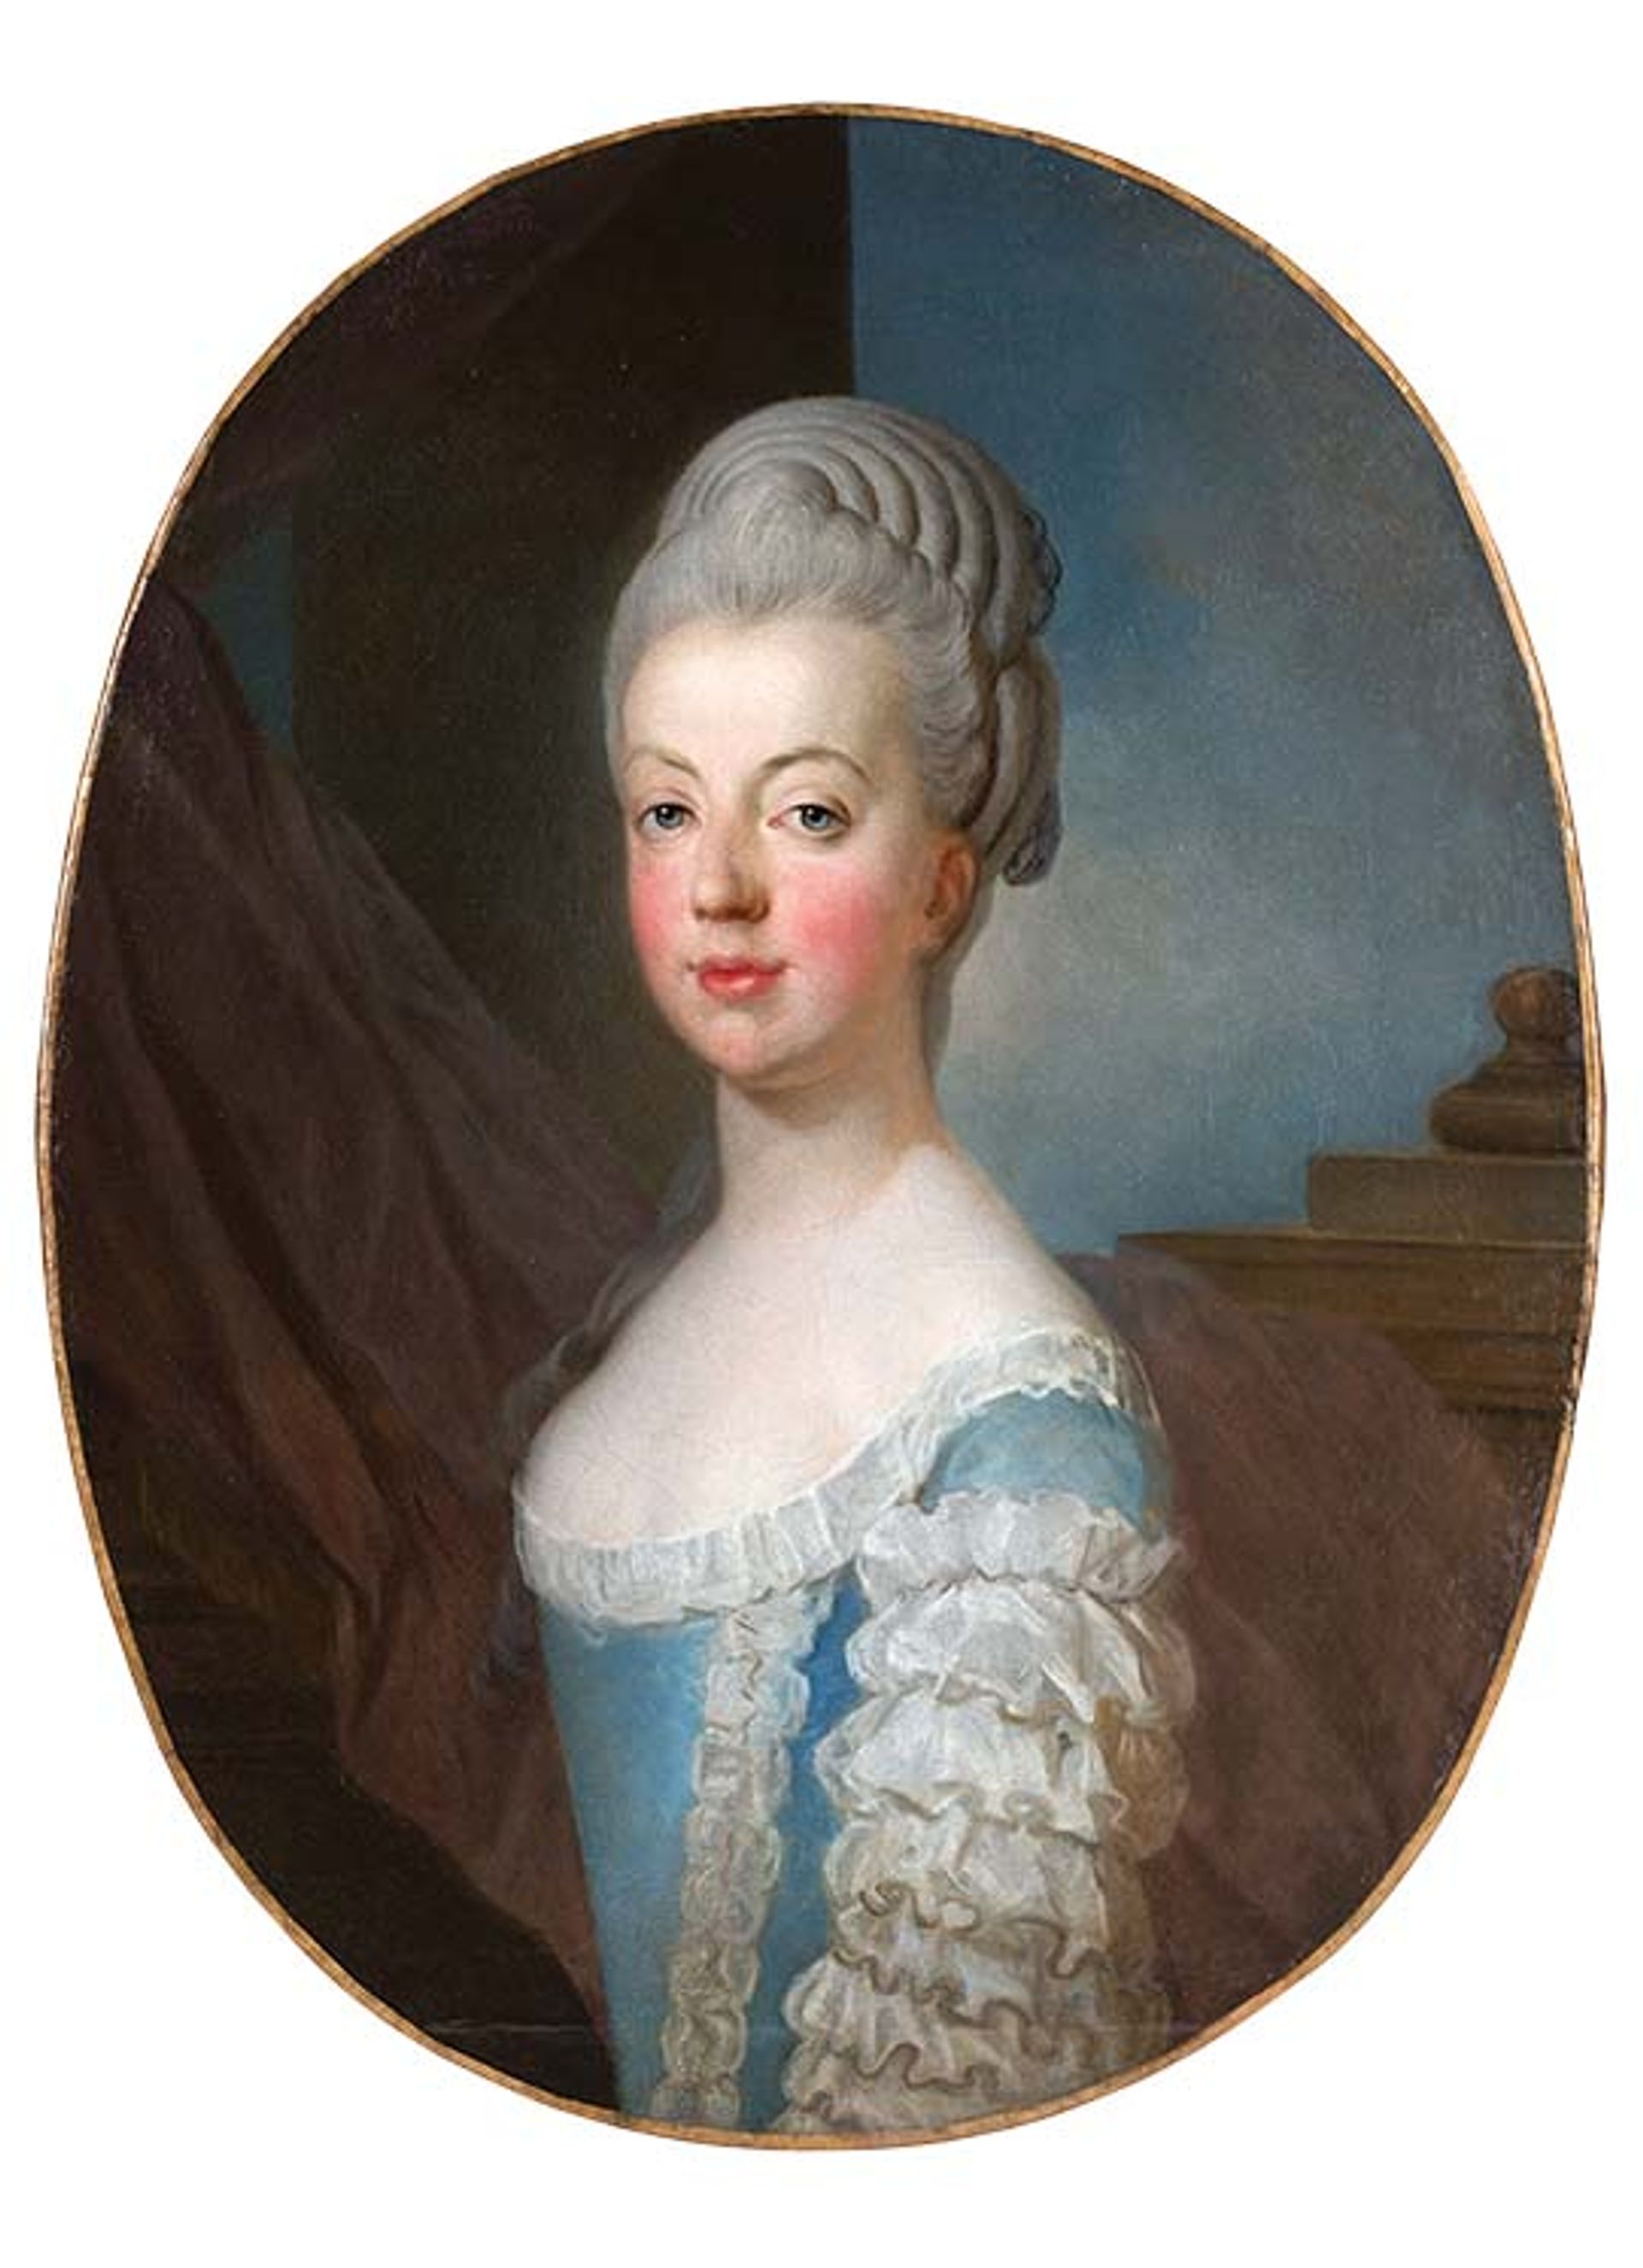 Portrait of Marie-Antoinette (1772-73) by Joseph Siffred Duplessis © Aguttes